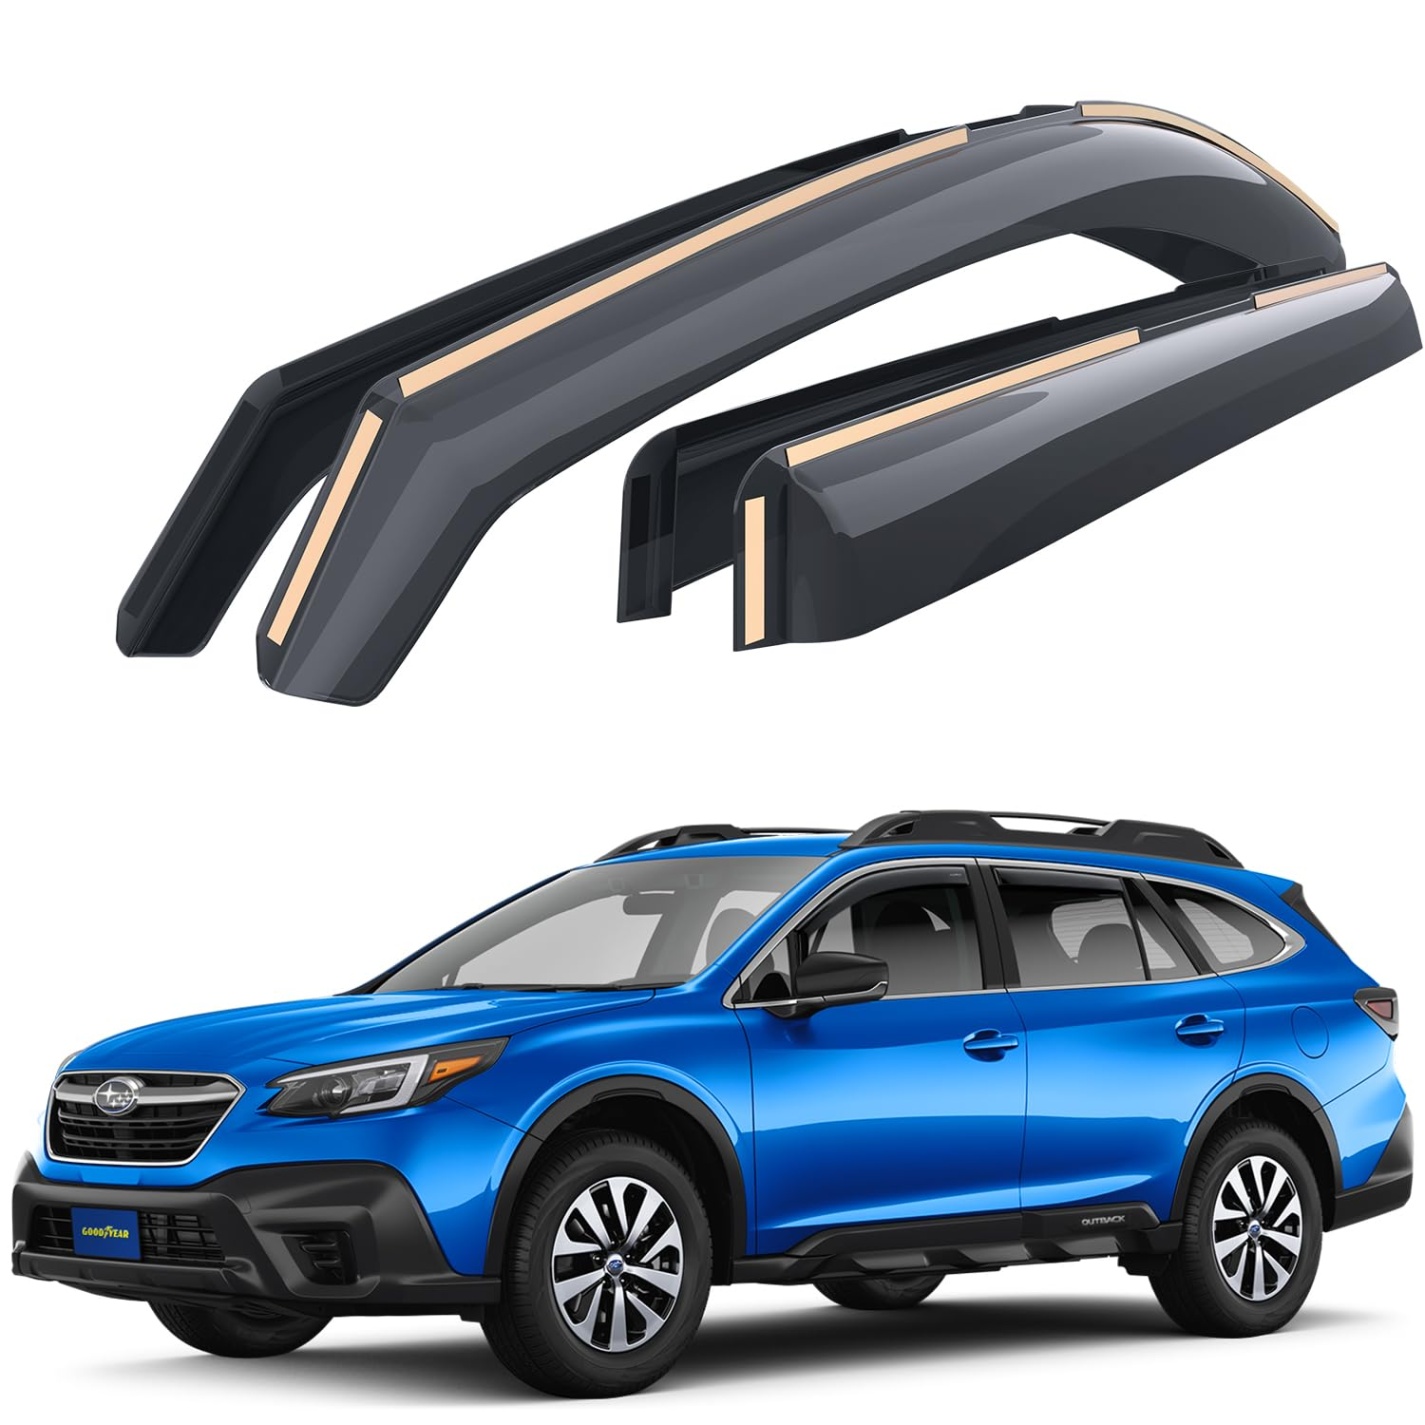 2020 subaru outback accessories Bulan 1 Goodyear Shatterproof in-Channel Window Deflectors for Subaru Outback  -, Rain Guards, Window Visors for Cars, Vent Deflector, Car  Accessories,